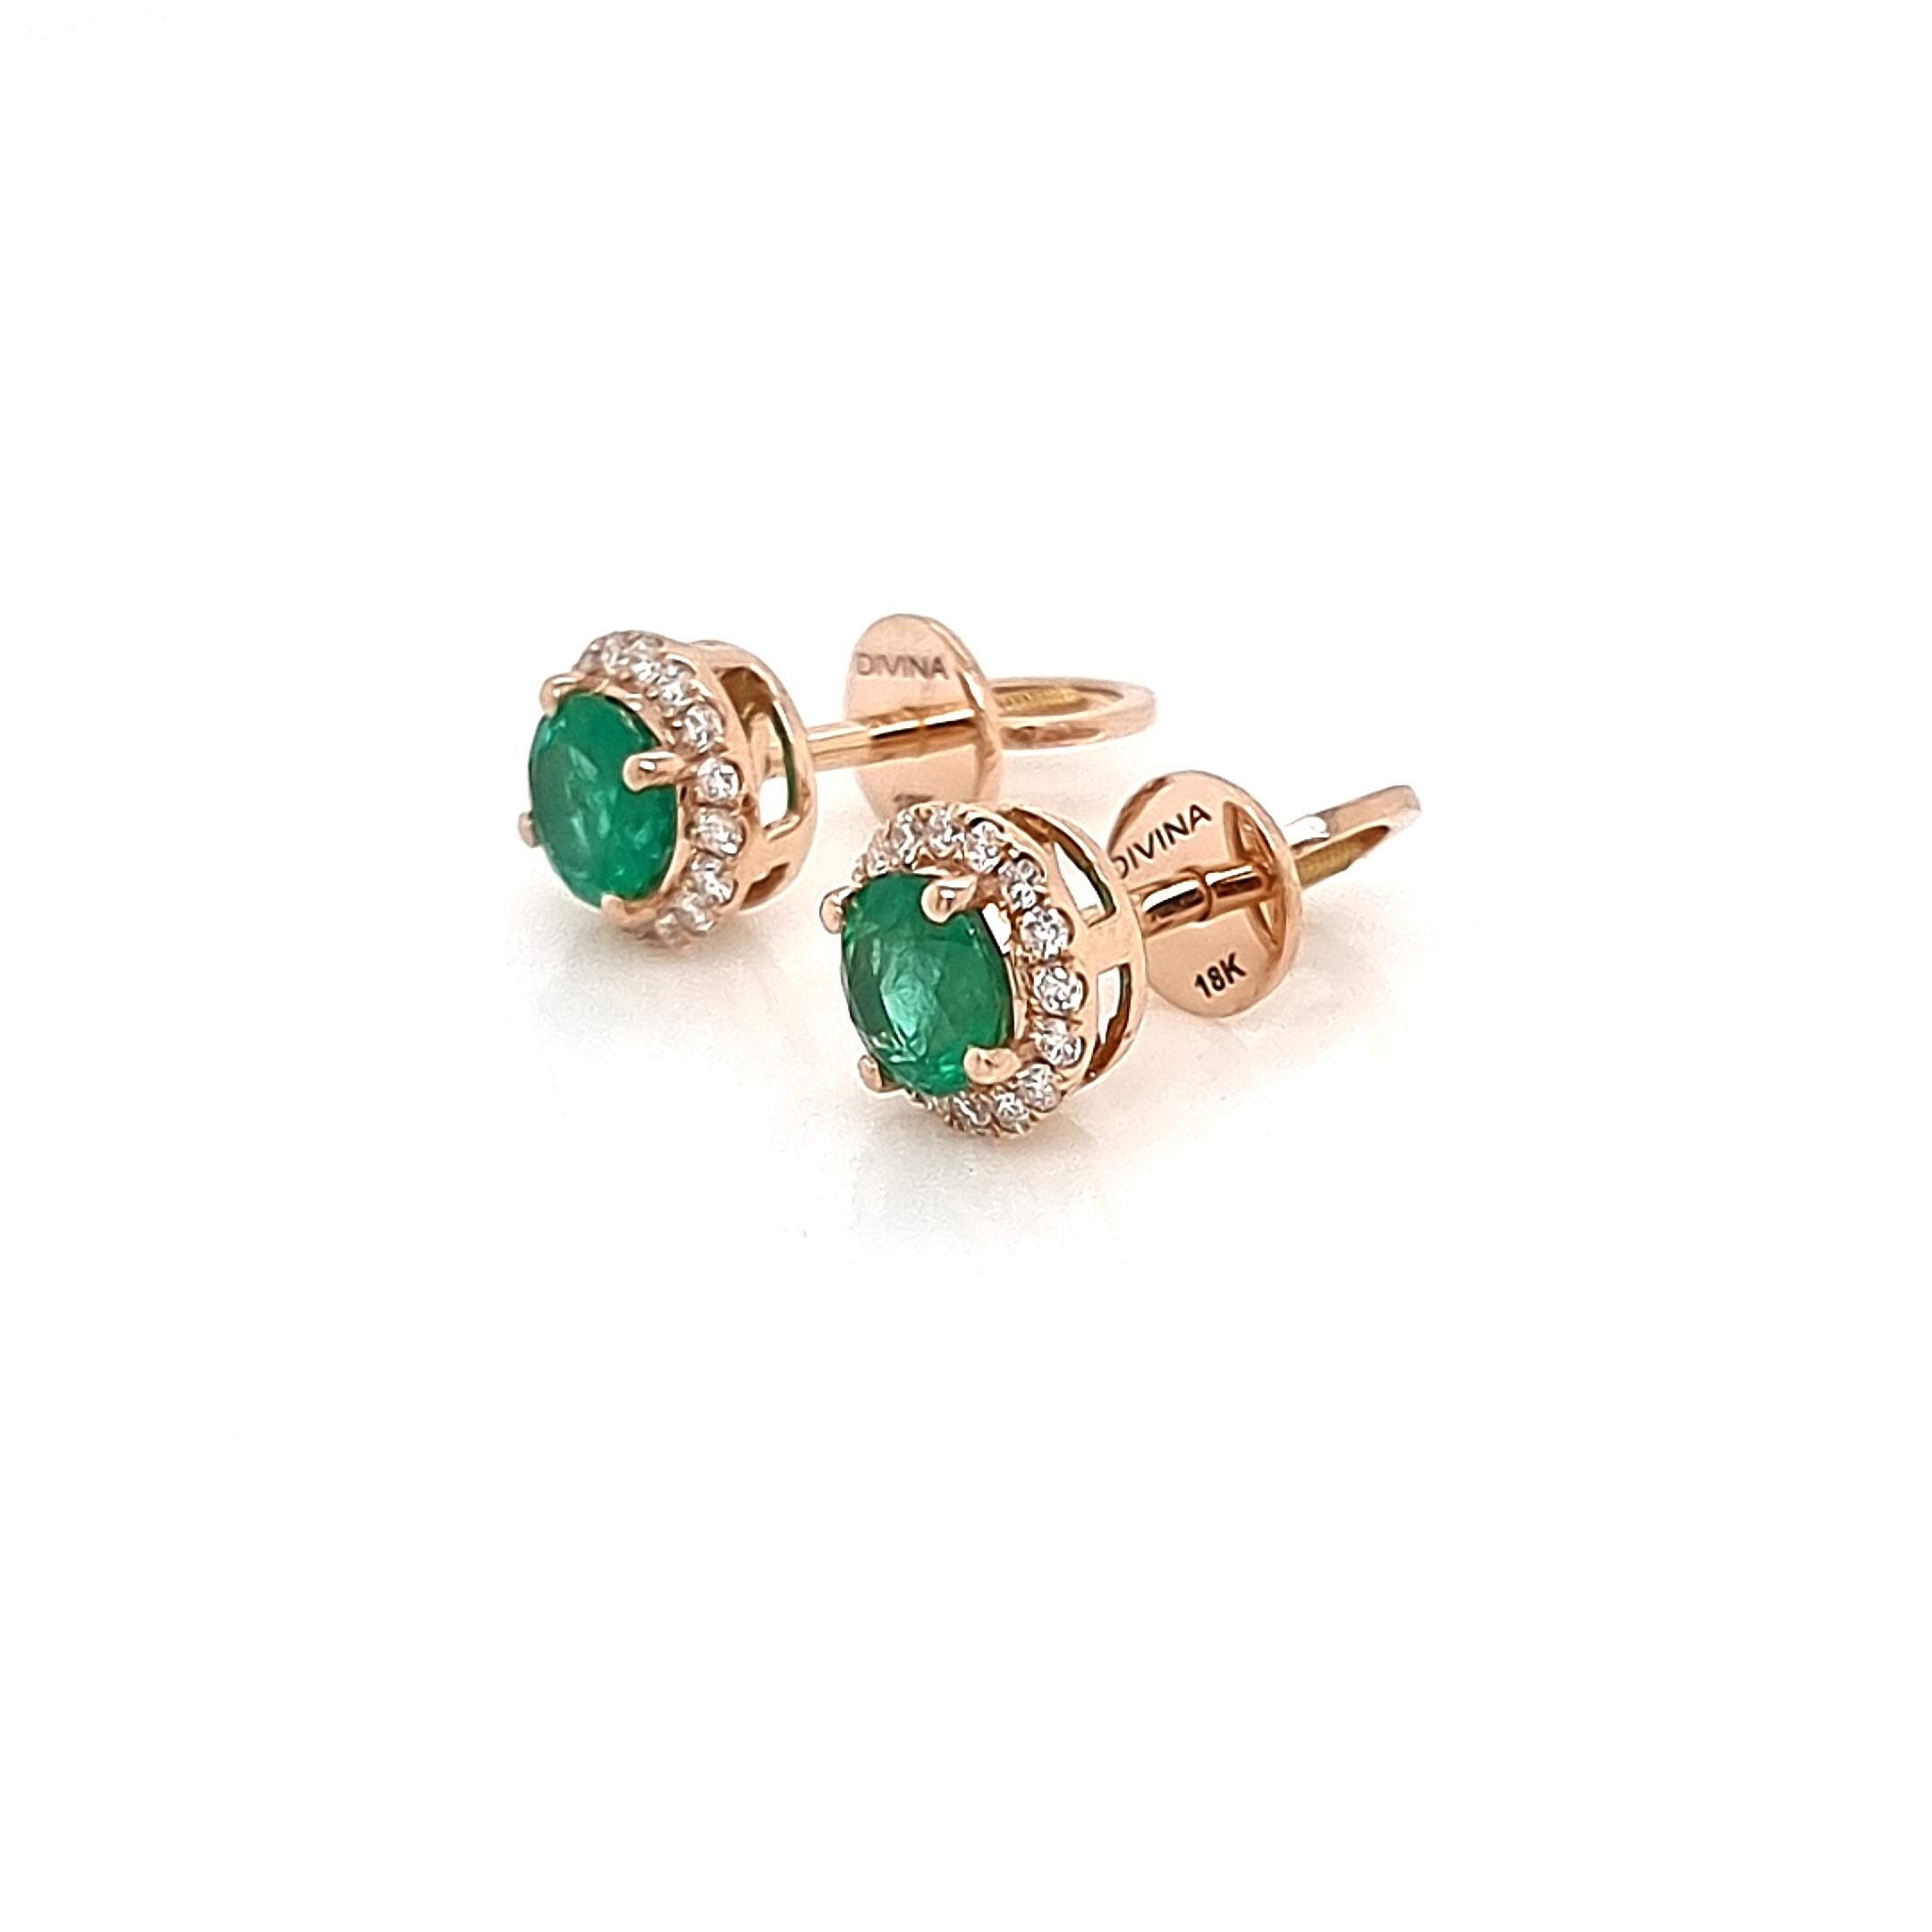 Step into a world of timeless elegance with our classic earrings, boasting the captivating allure of 5.00 mm round emeralds, radiating a rich and lush green hue. These exquisite gemstones are perfectly complemented by dazzling white accent diamonds,